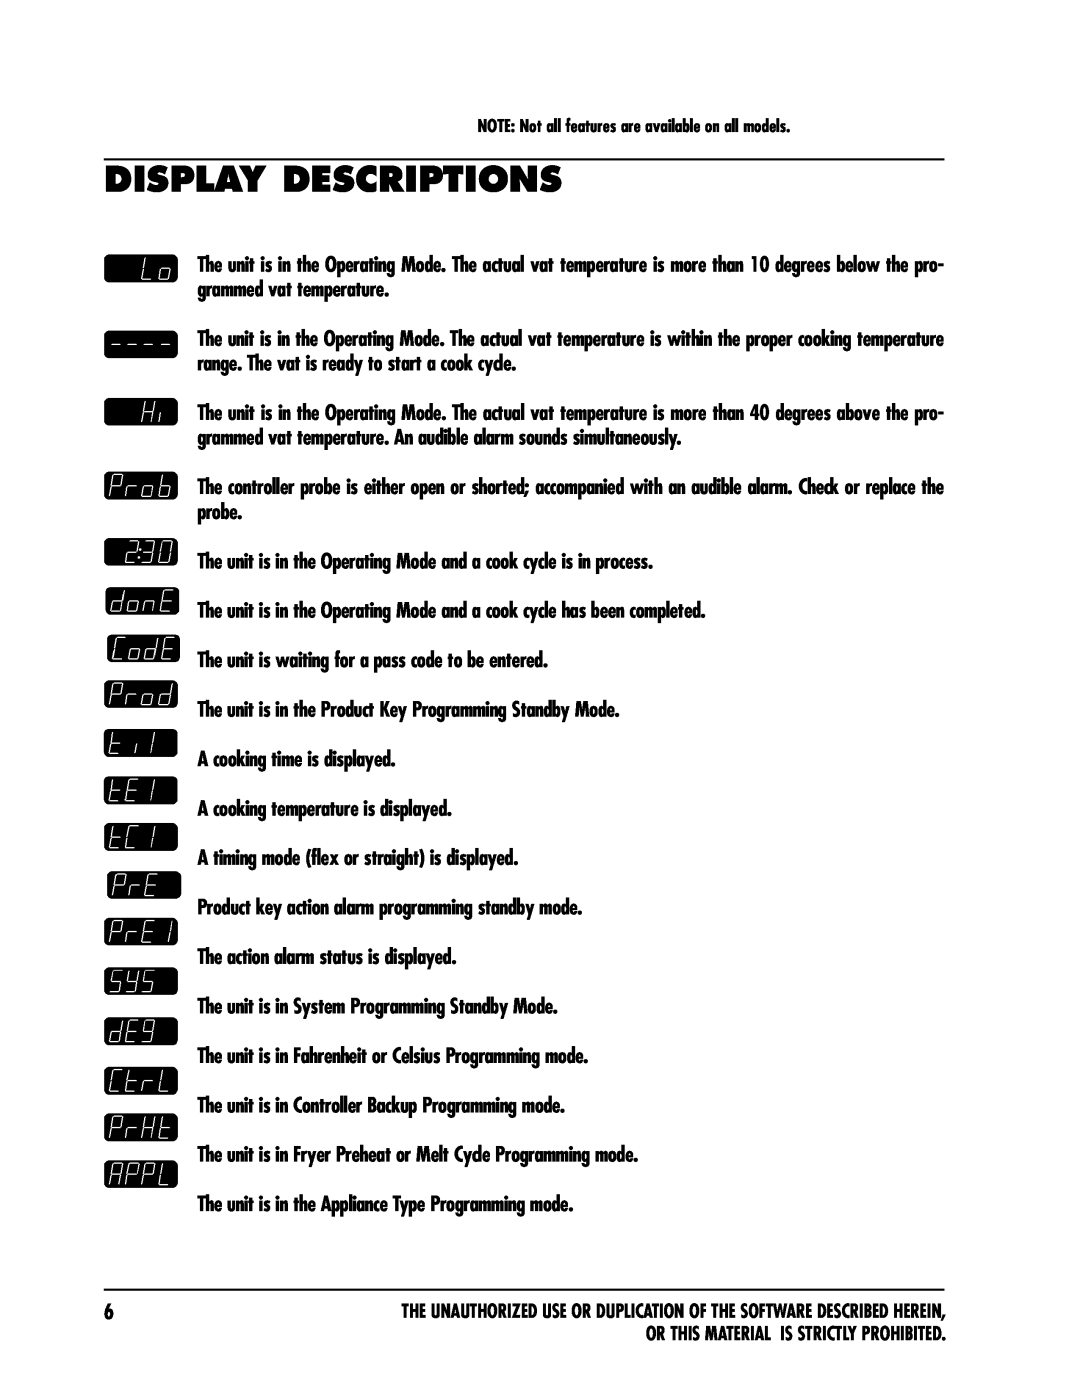 Keating Of Chicago IM-2000 manual Display Descriptions 